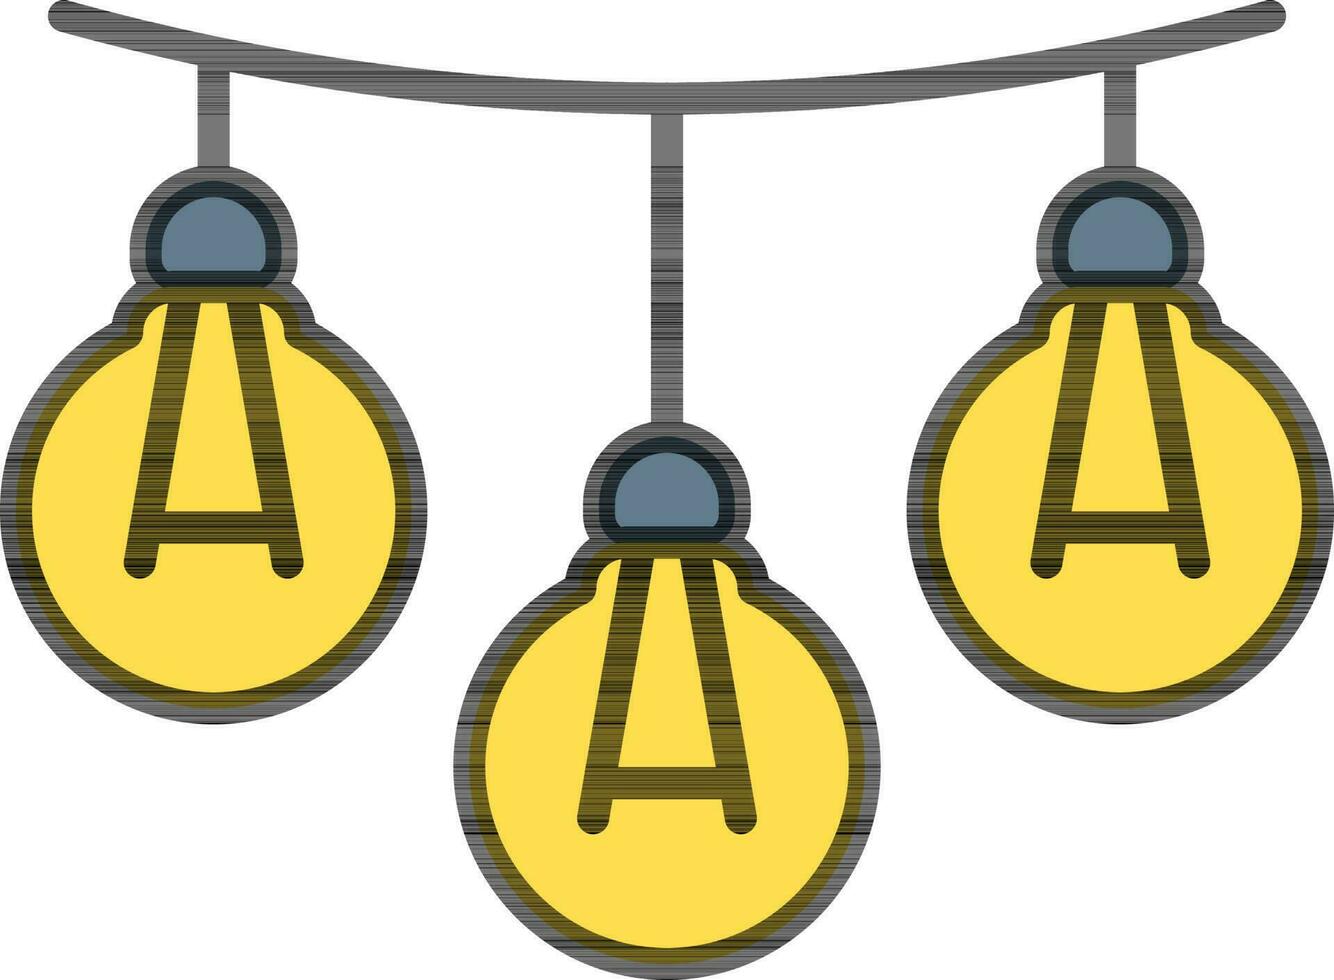 Lighting garland icon in yellow and black color. vector